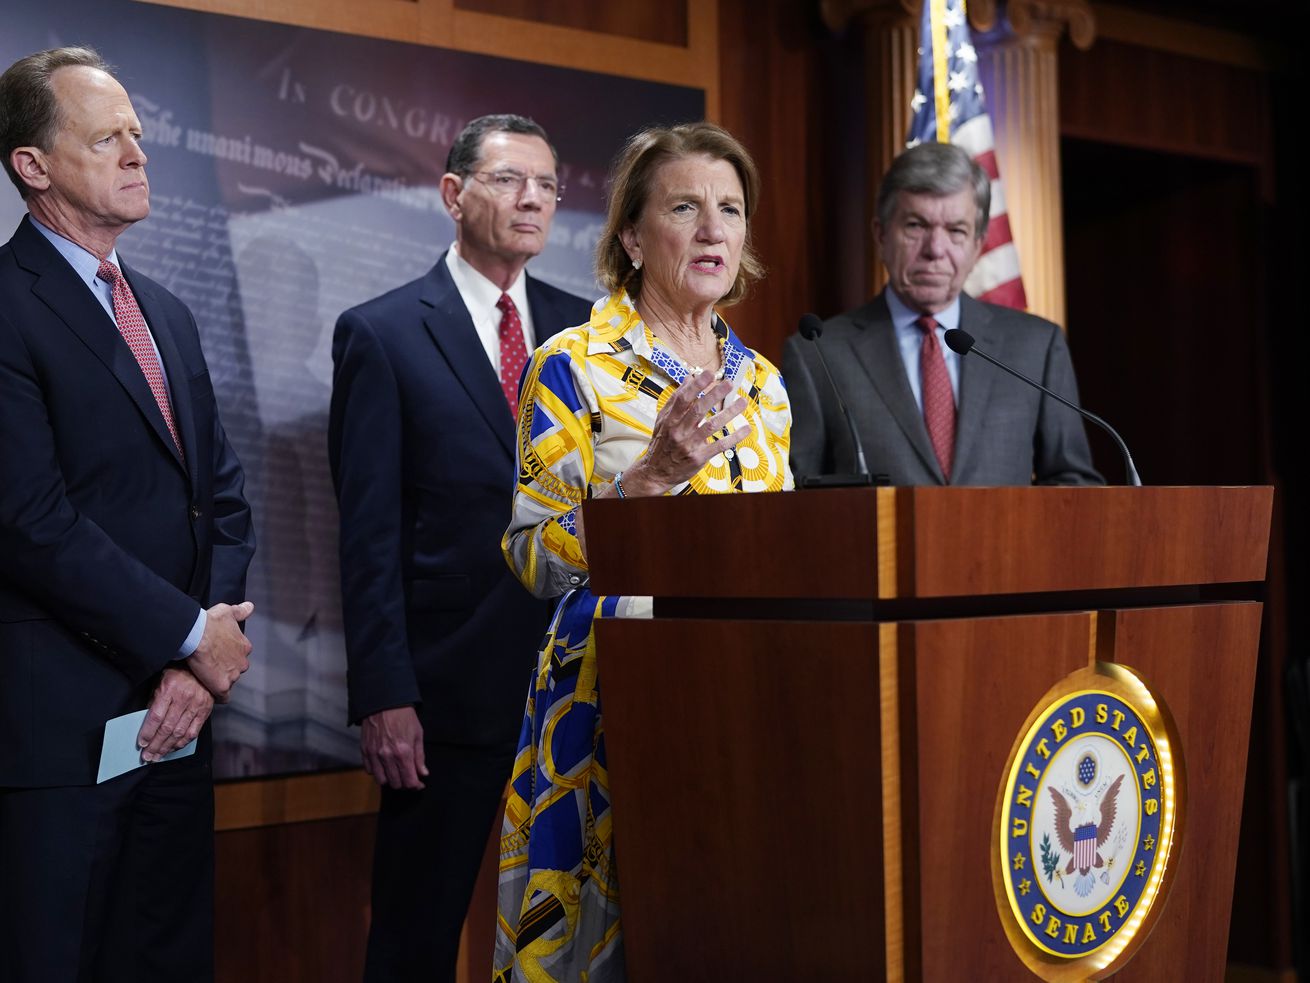 Sen. Shelley Moore Capito speaks at the Capitol in Washington, Thursday, May 27, 2021, as from left, Sen. Pat Toomey, R-Pa., Sen. Barrasso, R-Wy. and Sen. Roy Blunt, R-Mo., look on. Republican senators outlined a $928 billion infrastructure proposal Thursday, a counteroffer to President Joe Biden’s more sweeping plan as the two sides struggle to negotiate a bipartisan compromise and remain far apart on how to pay for the massive spending.